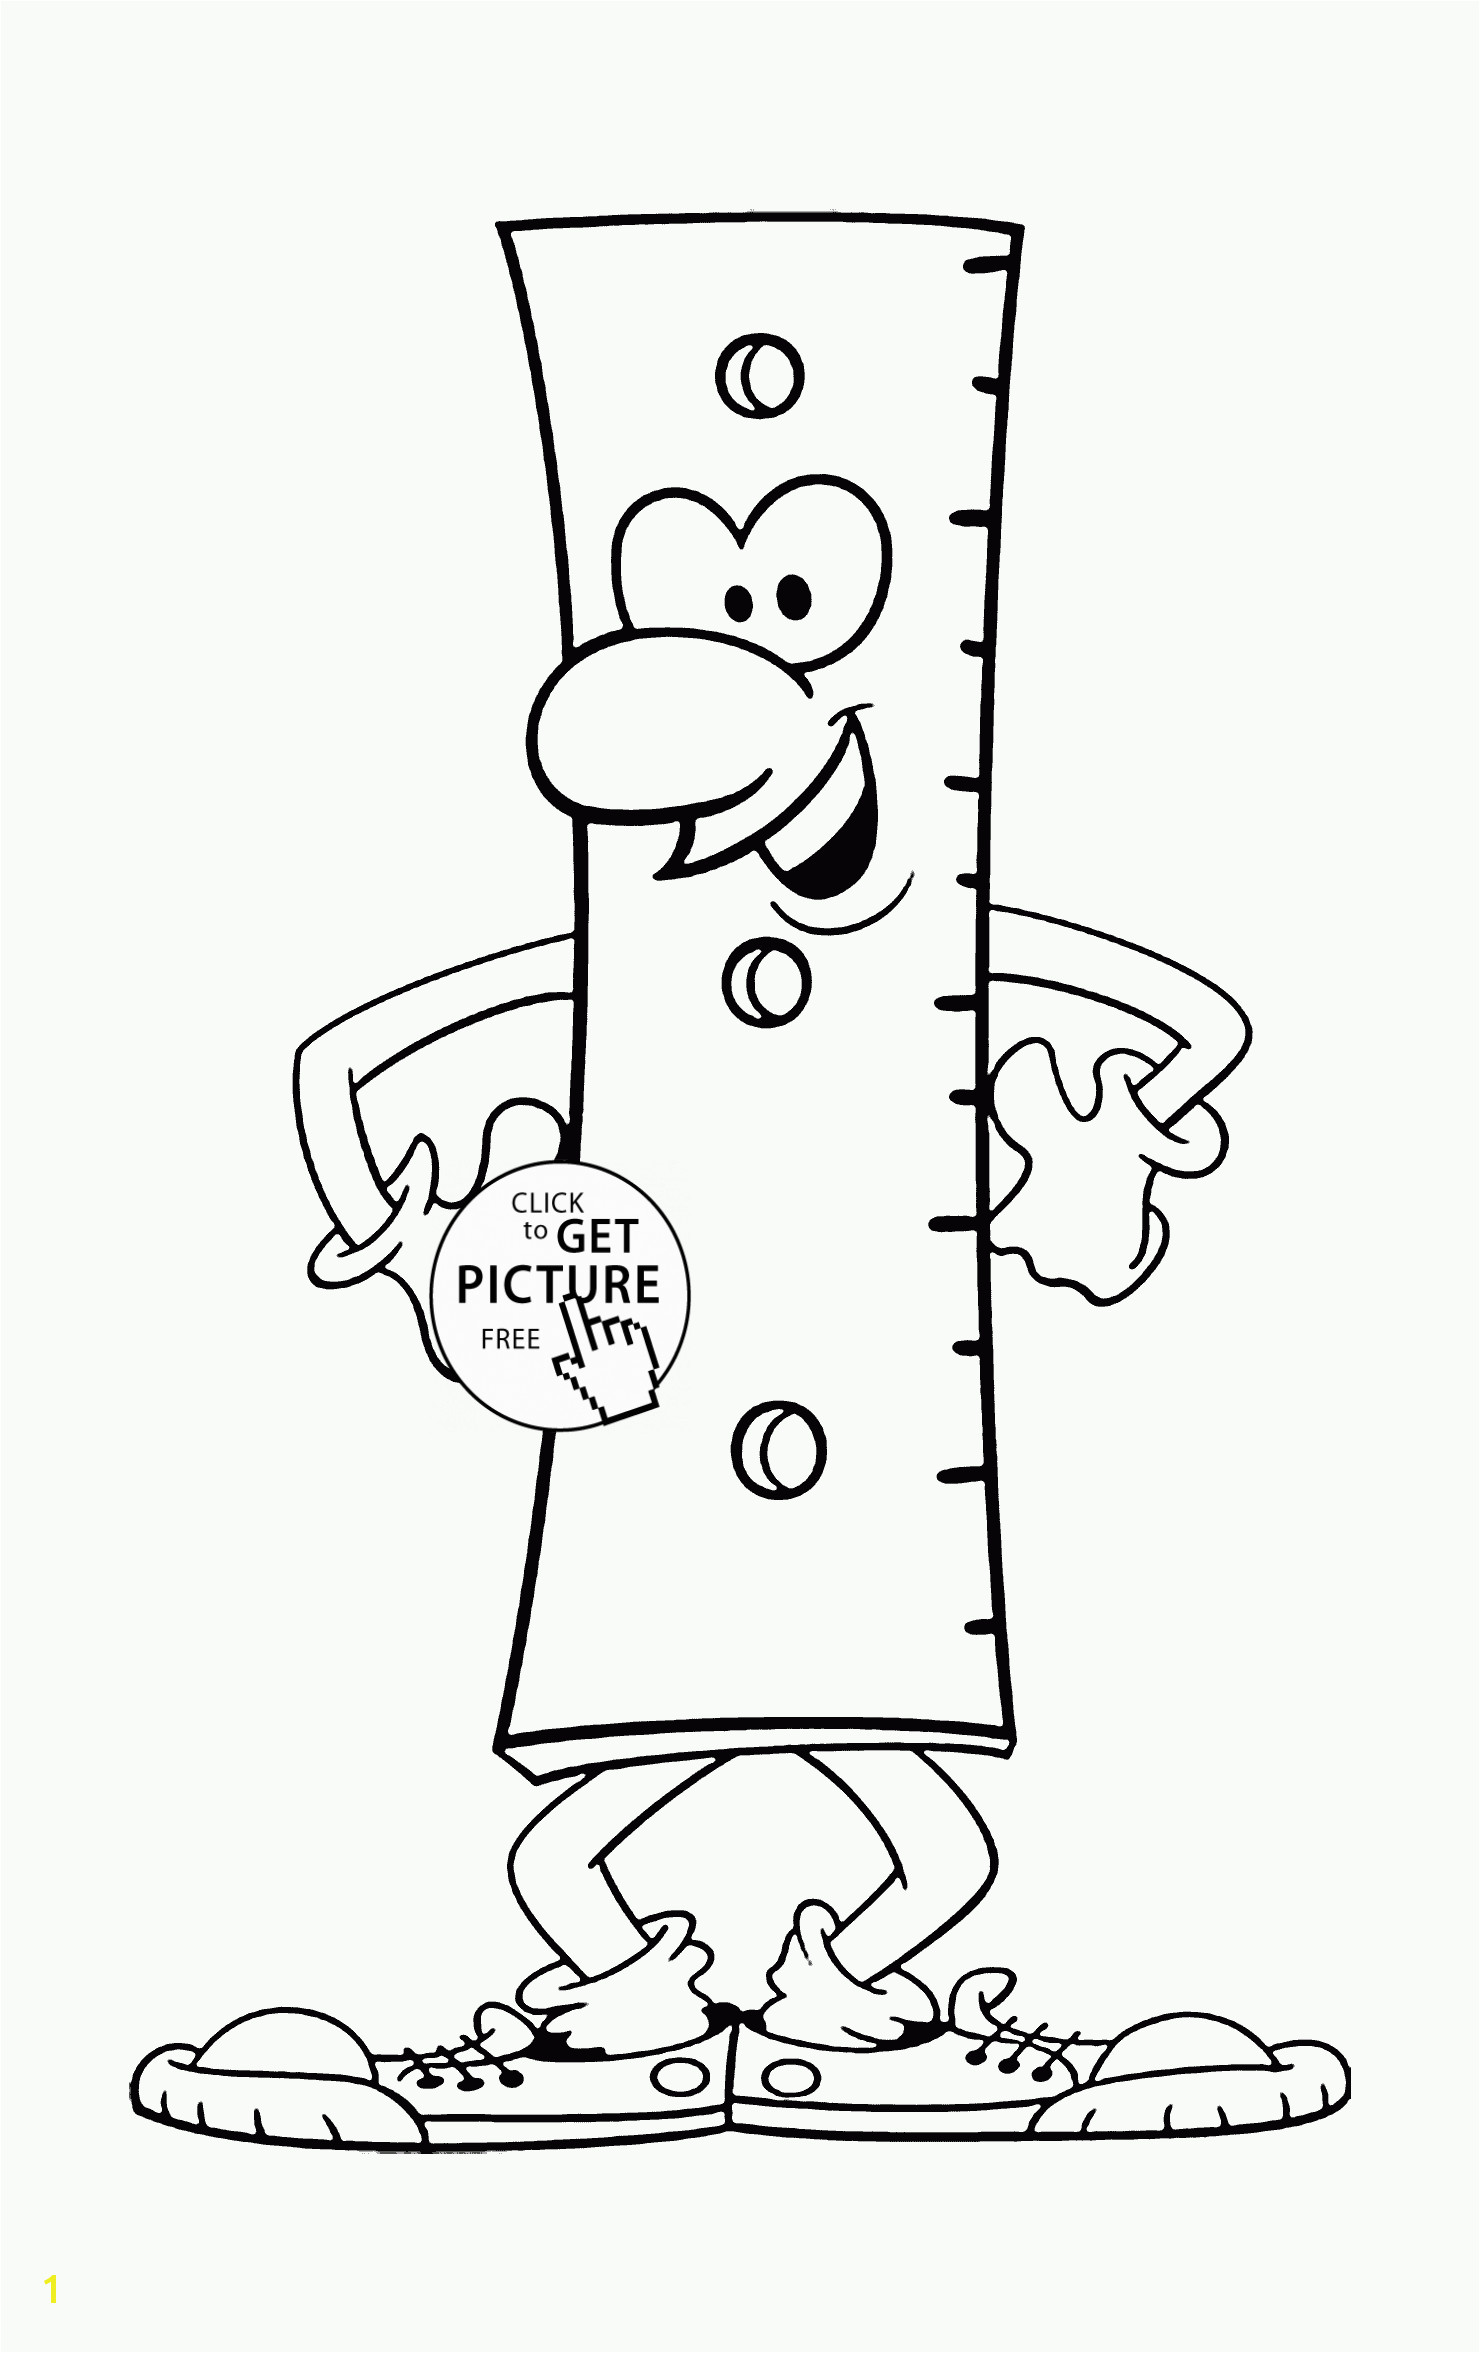 Coloring Pages Of Scissors Back to School Funny Ruler Coloring Page for Kids Educational